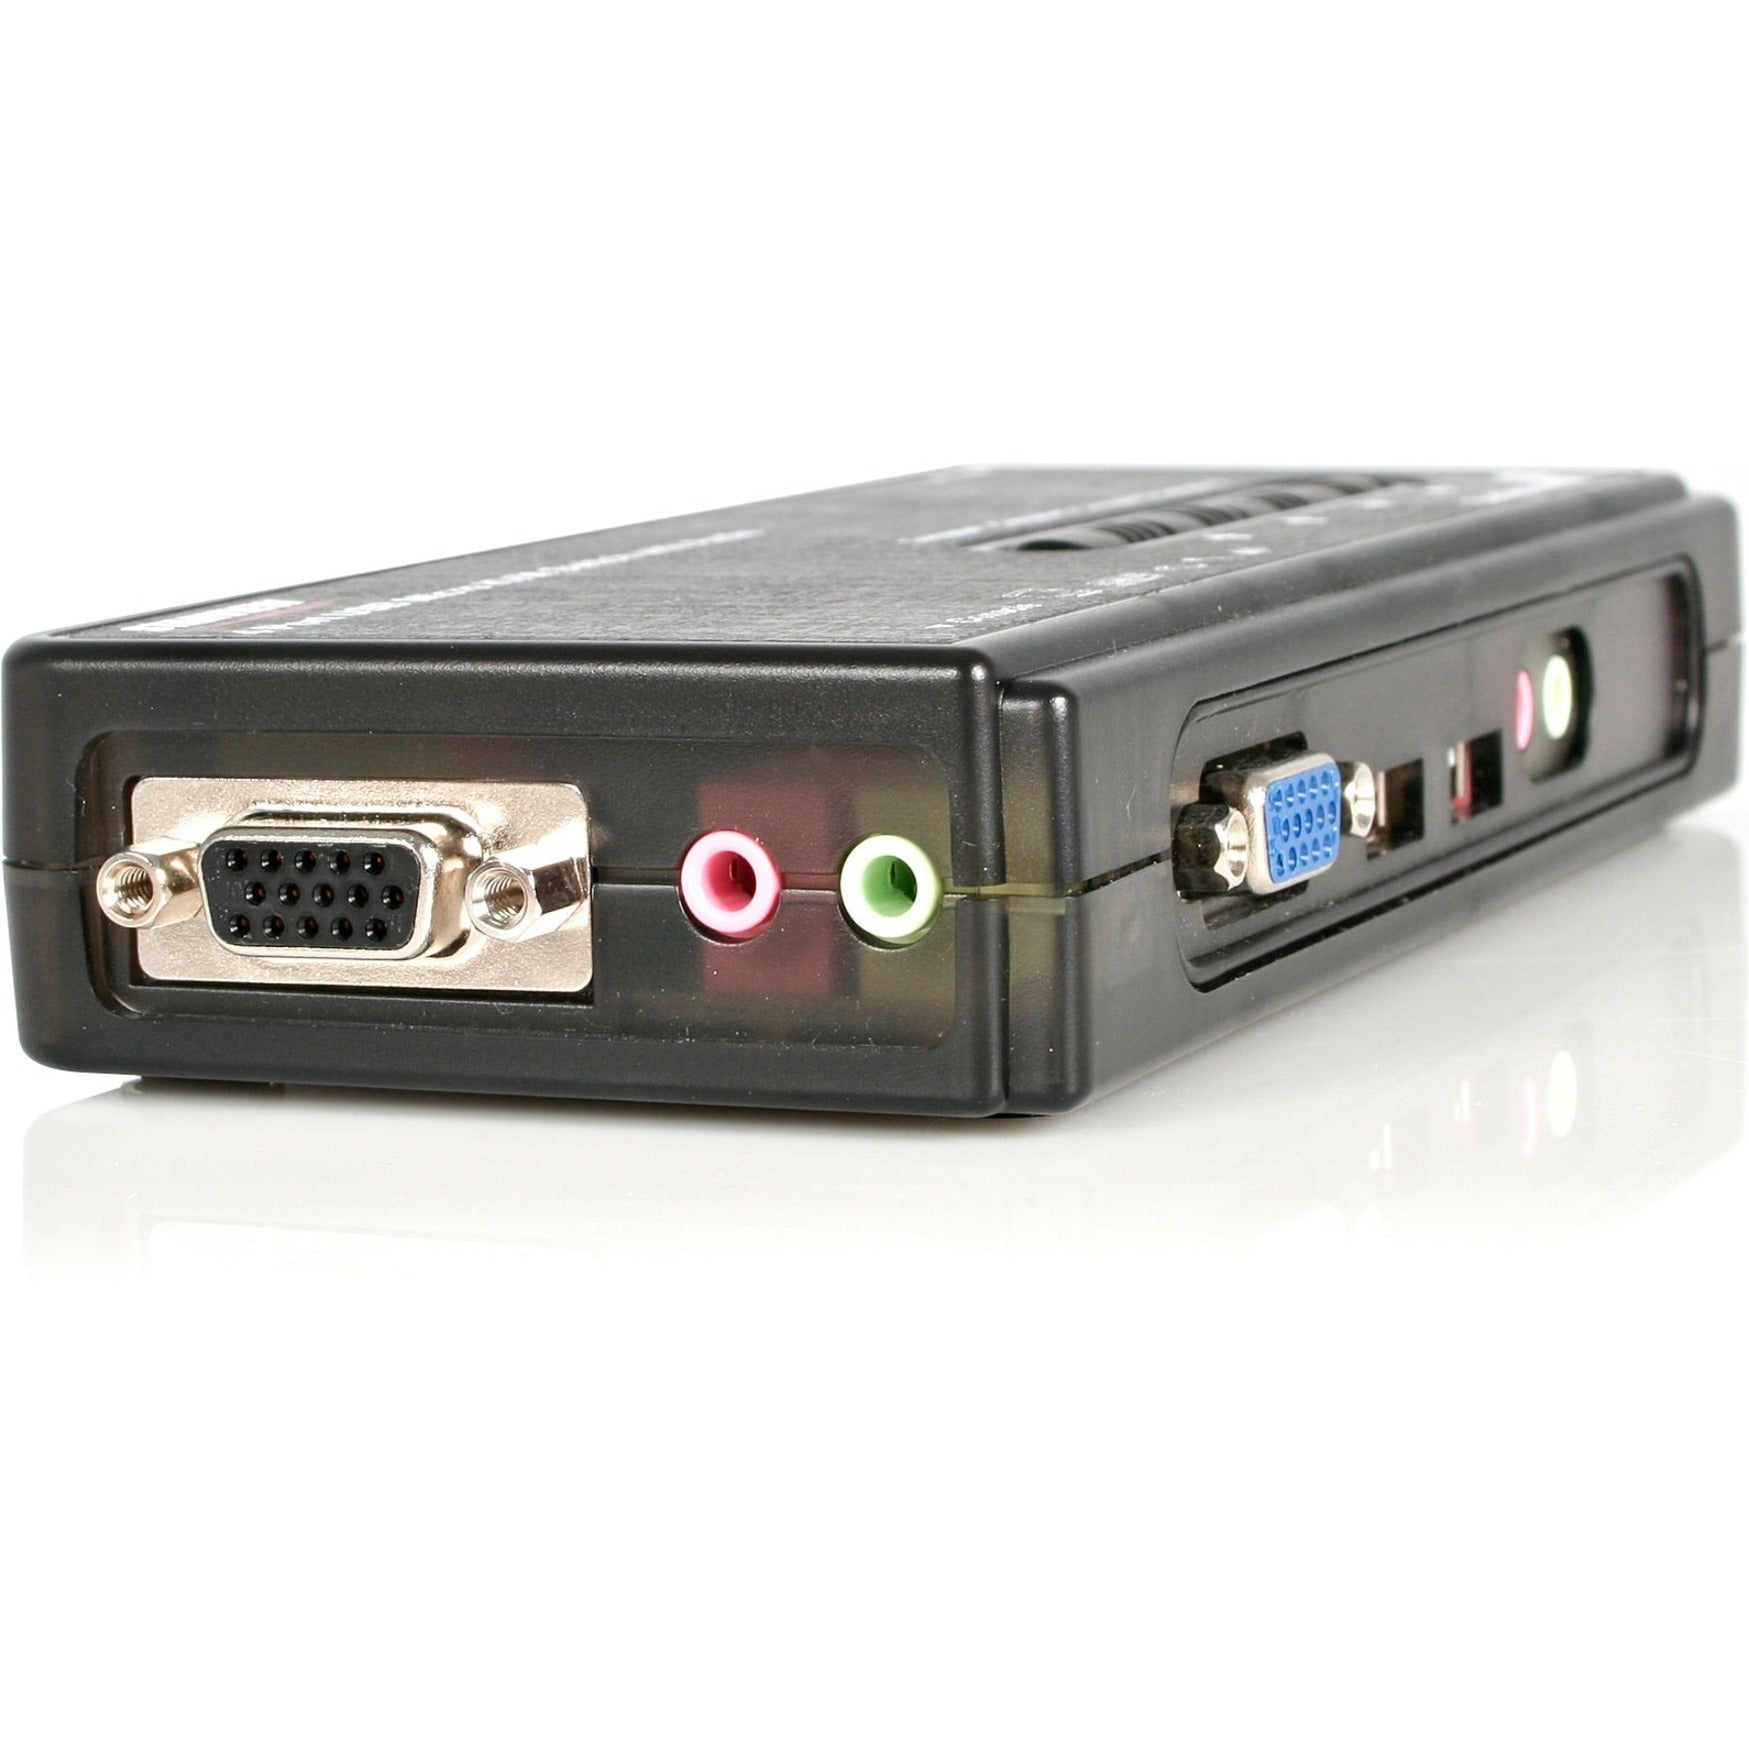 StarTech.com SV411KUSB 4P MINI USB KVM Switch with Cable and Audio Switching